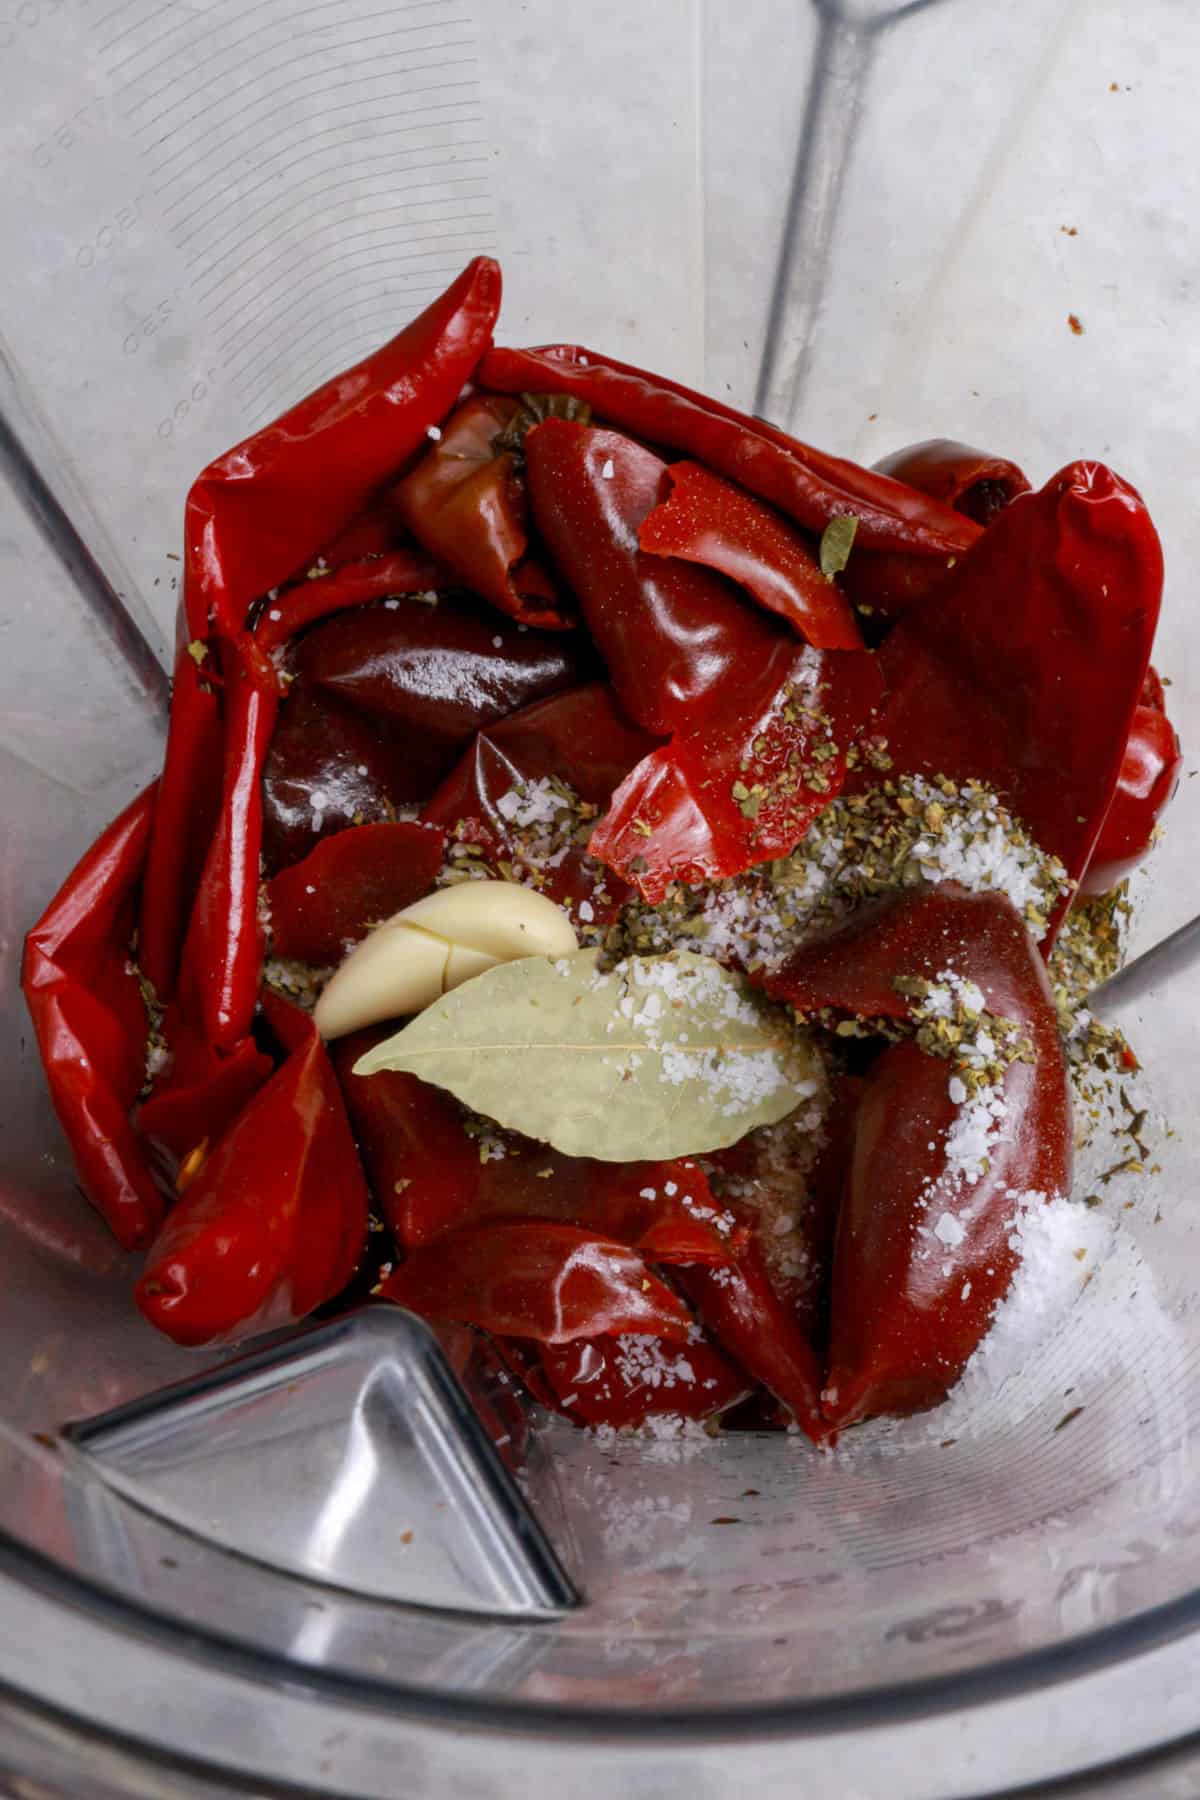 A blender with boiled red chiles, spices and dried herbs